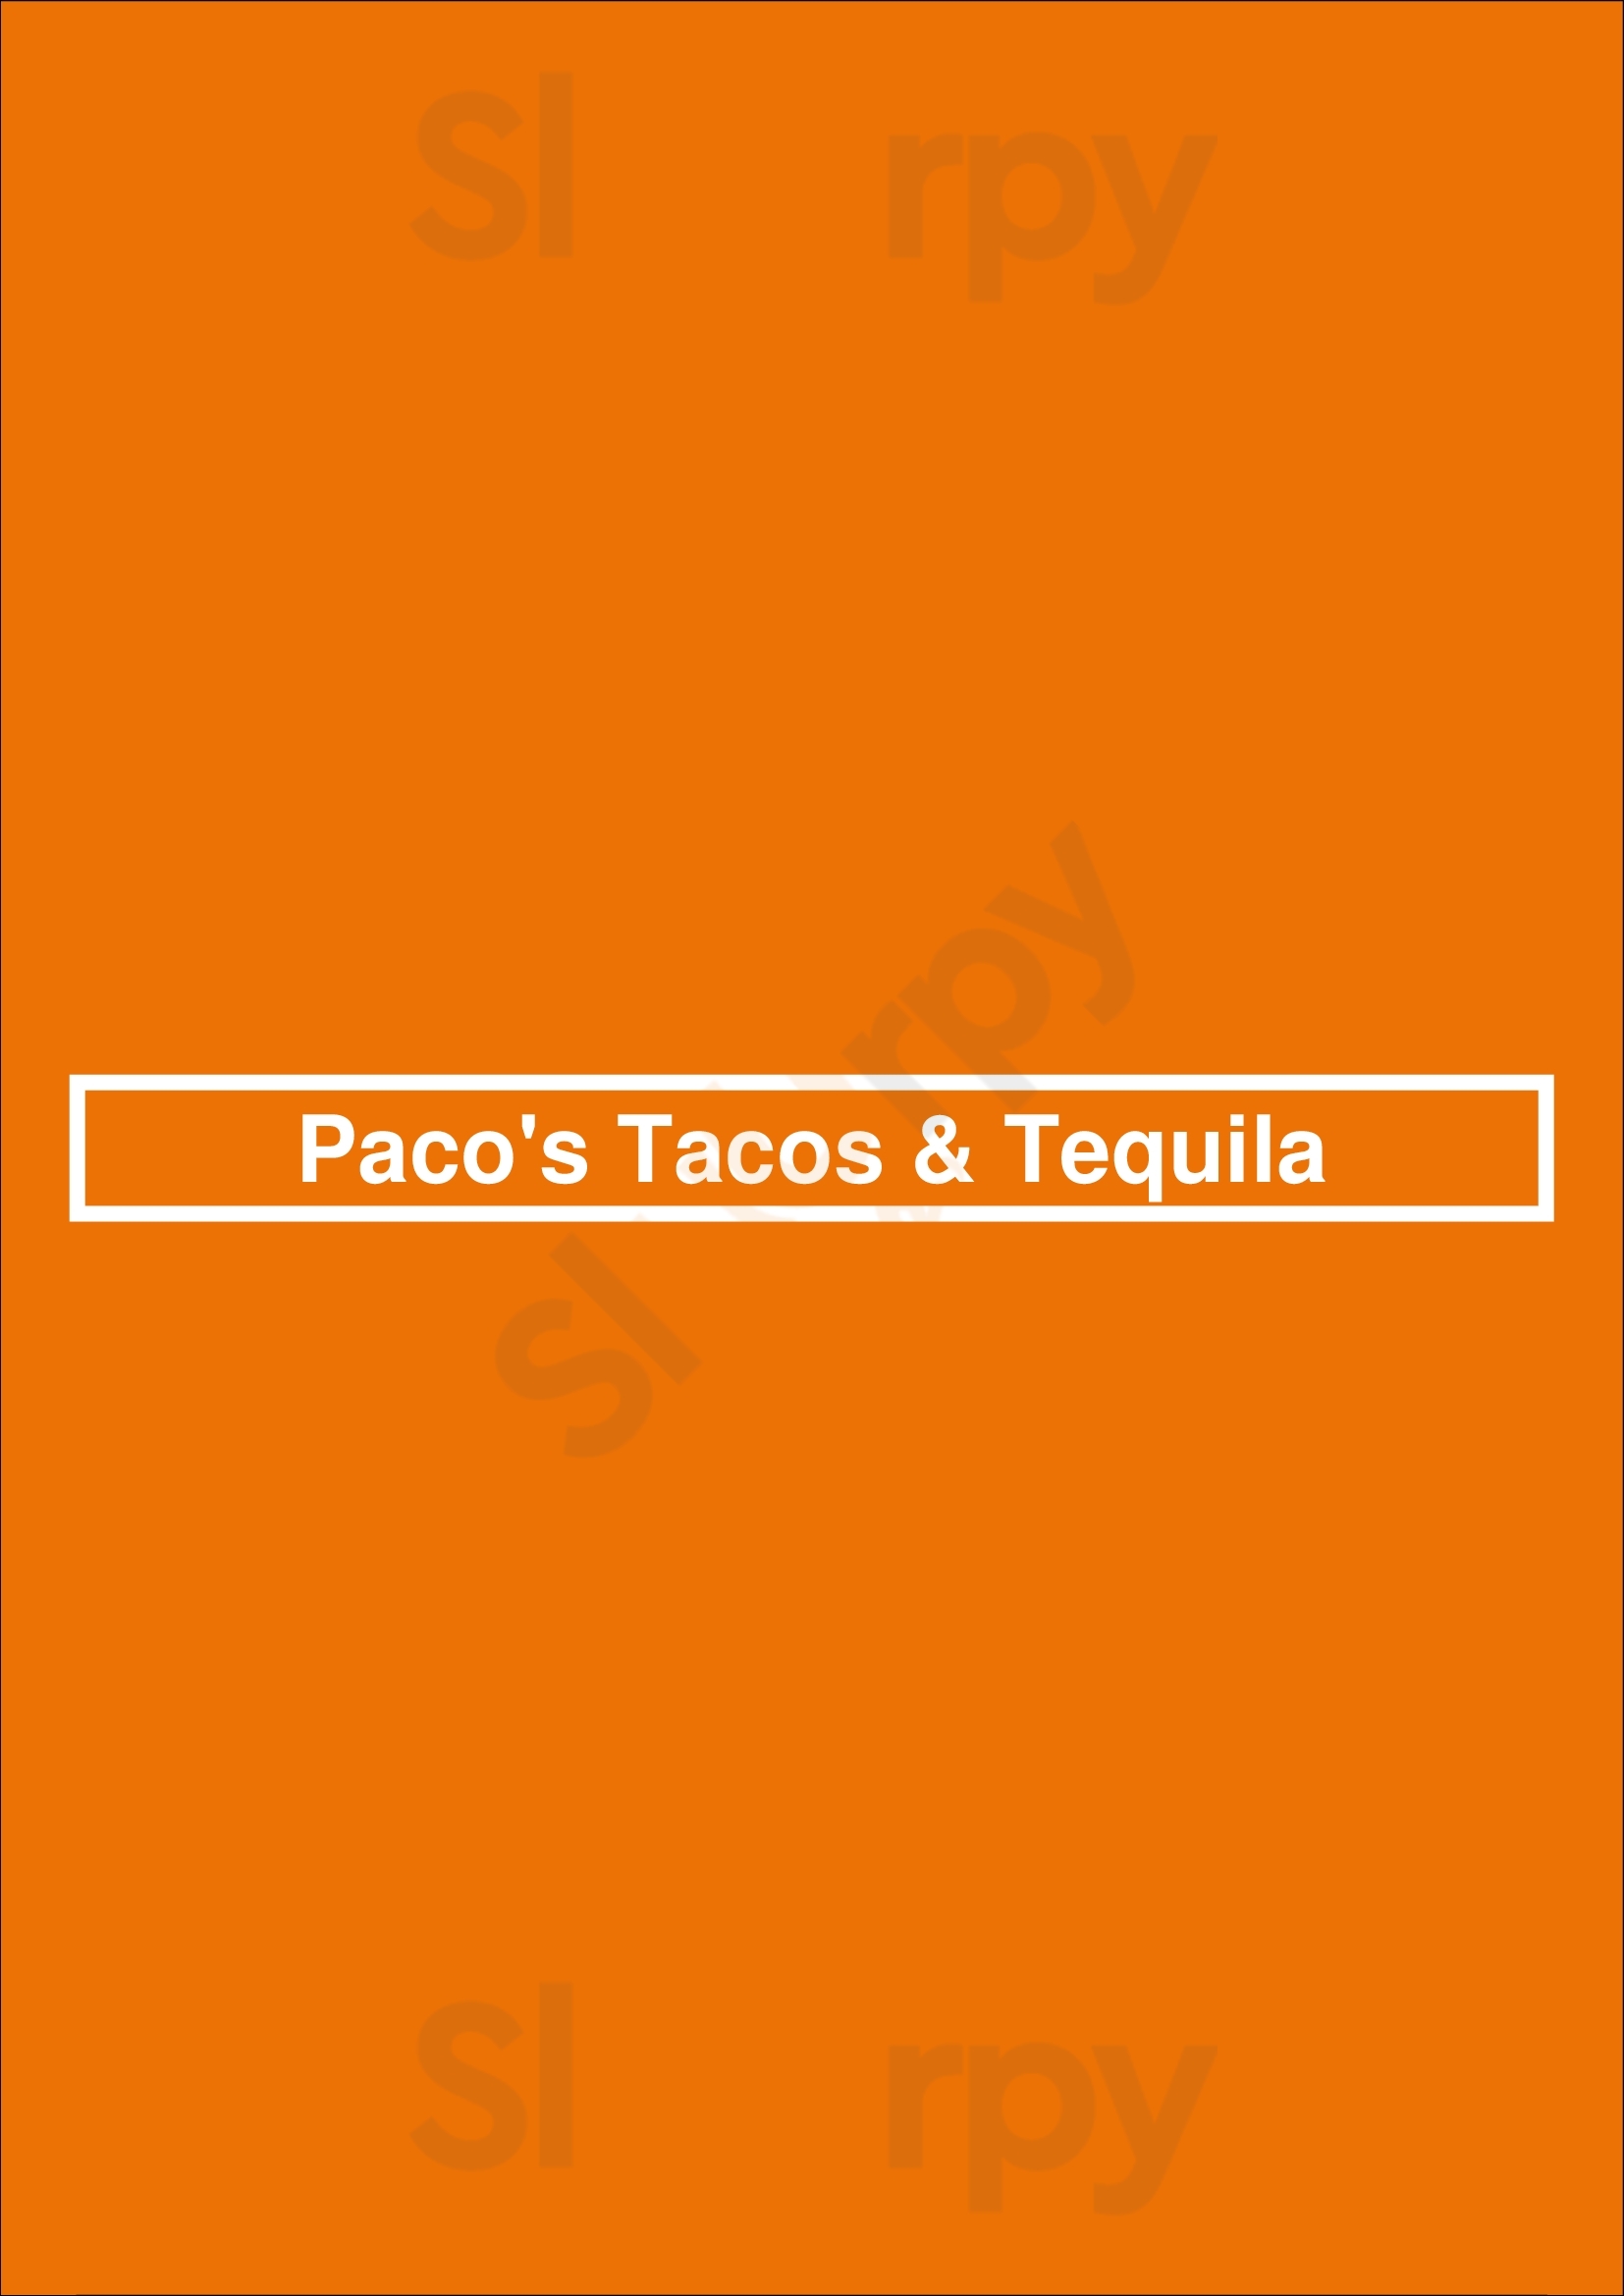 Paco's Tacos And Tequila Charlotte Menu - 1